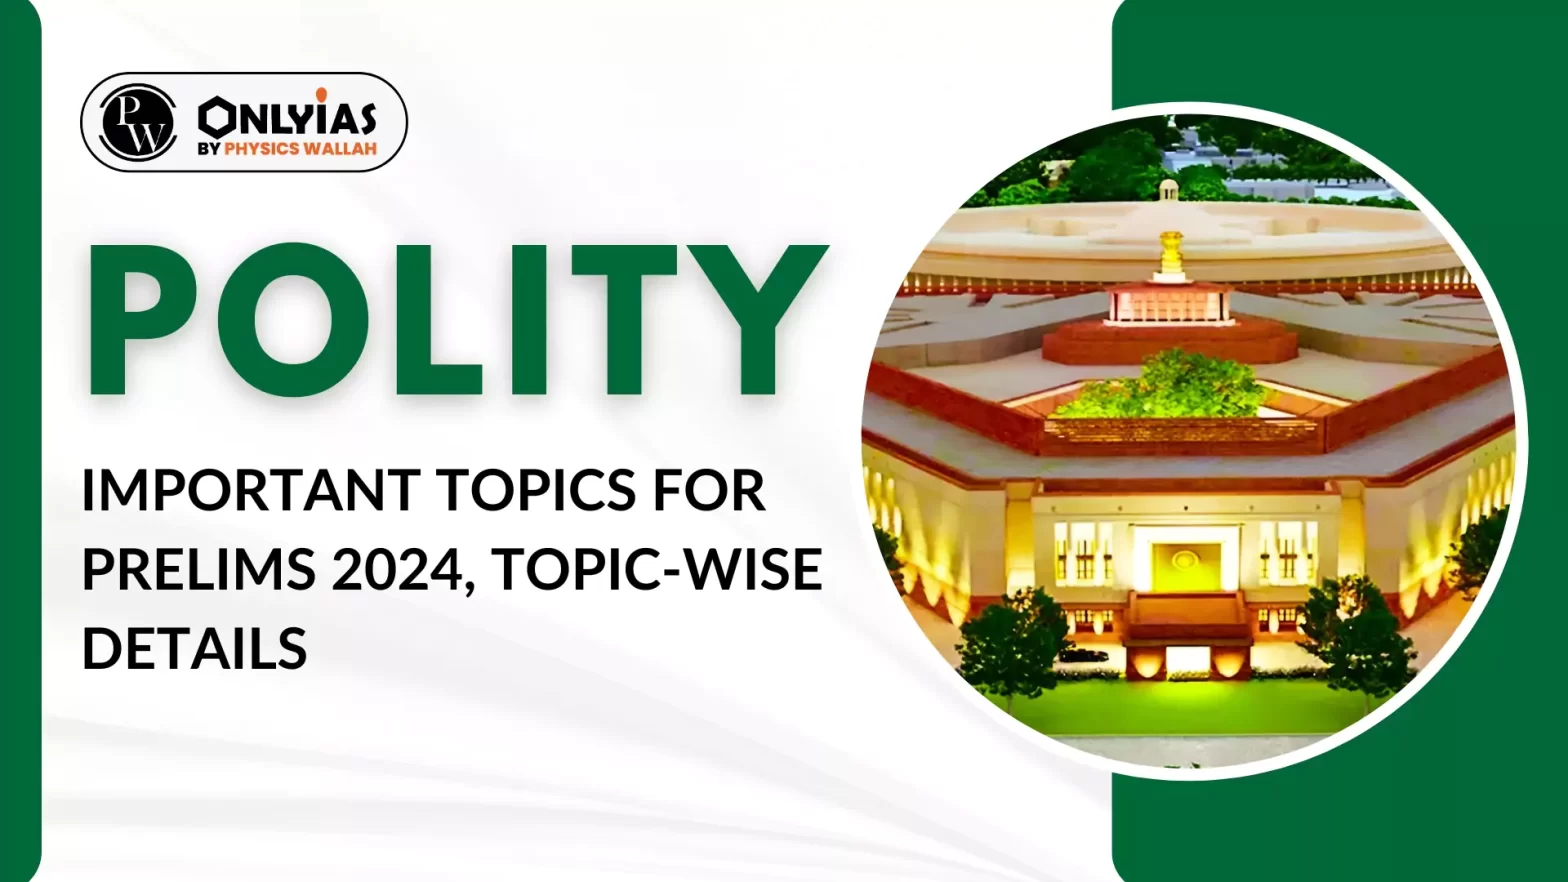 Polity Important Topics for Prelims 2024, Topic-wise Details